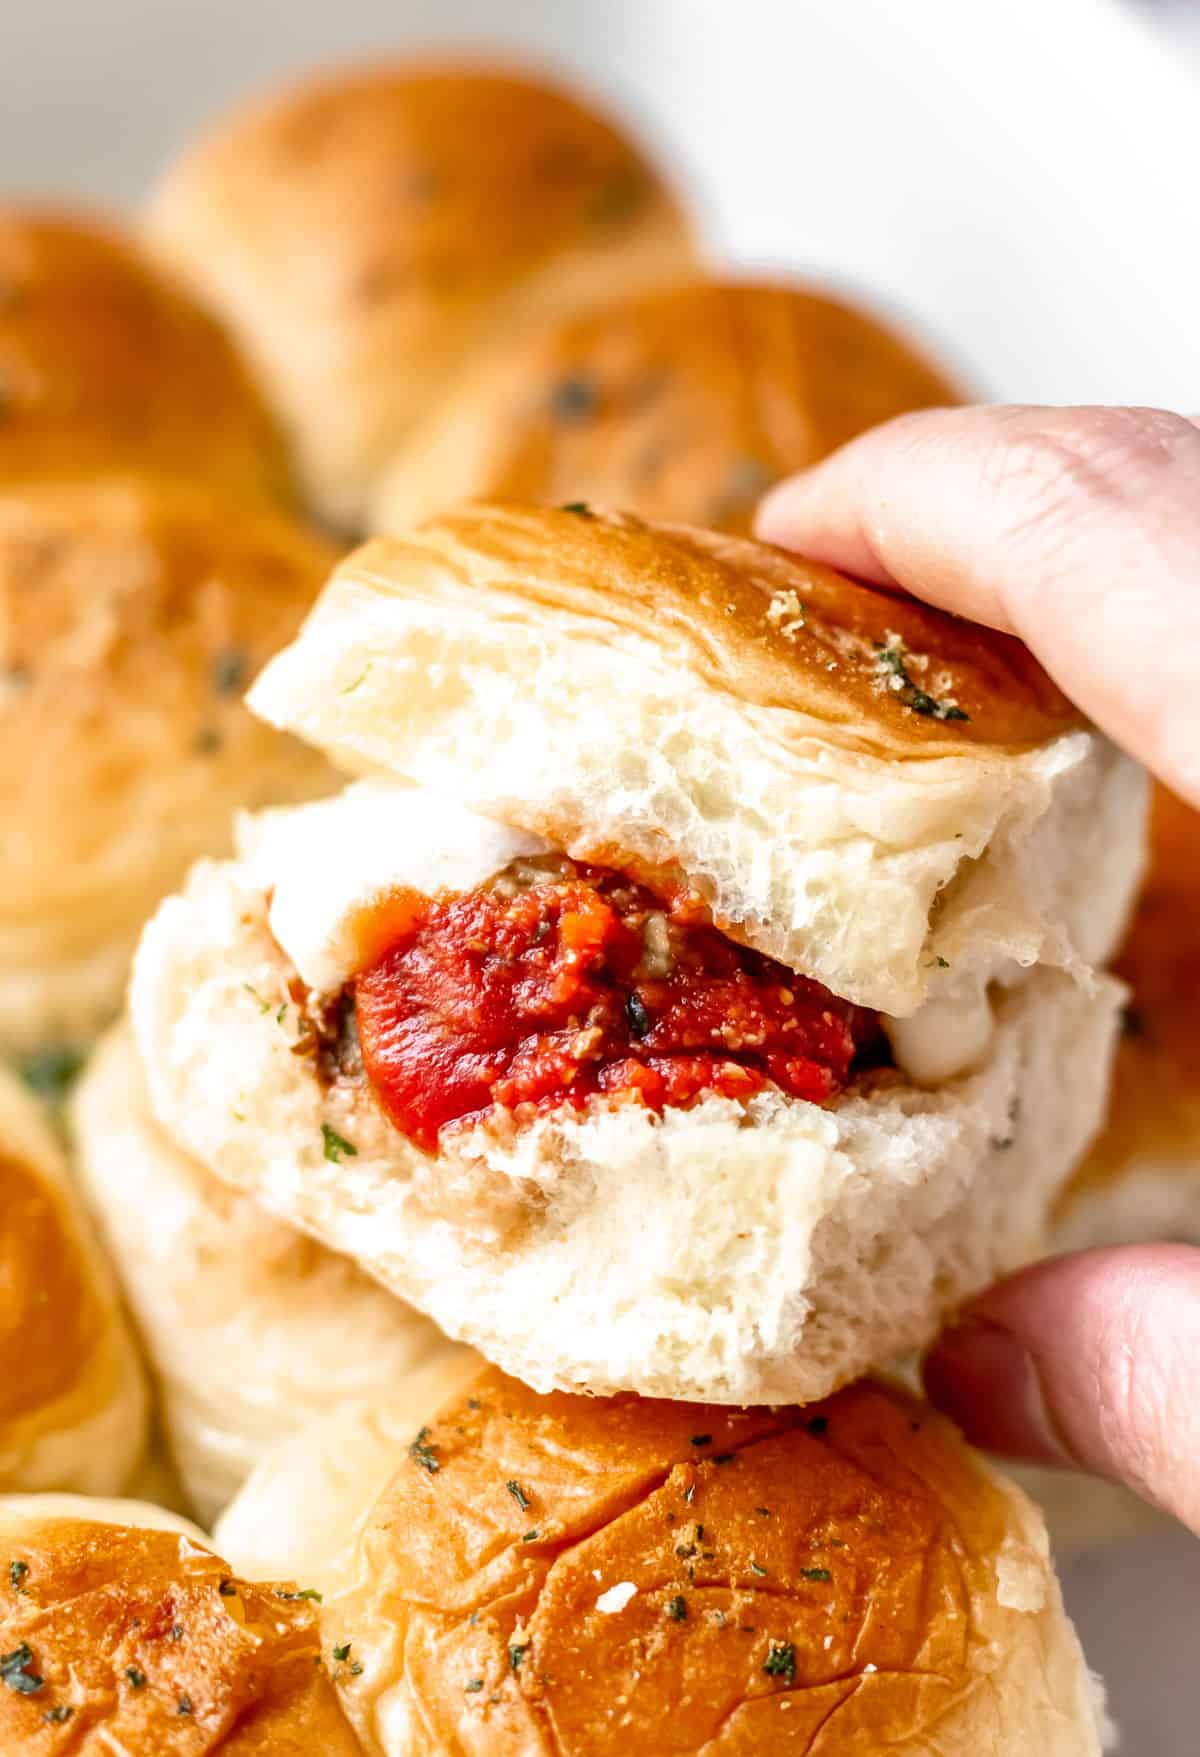 A hand holding up a meatball slider in front of the rest of the sliders still in the casserole dish